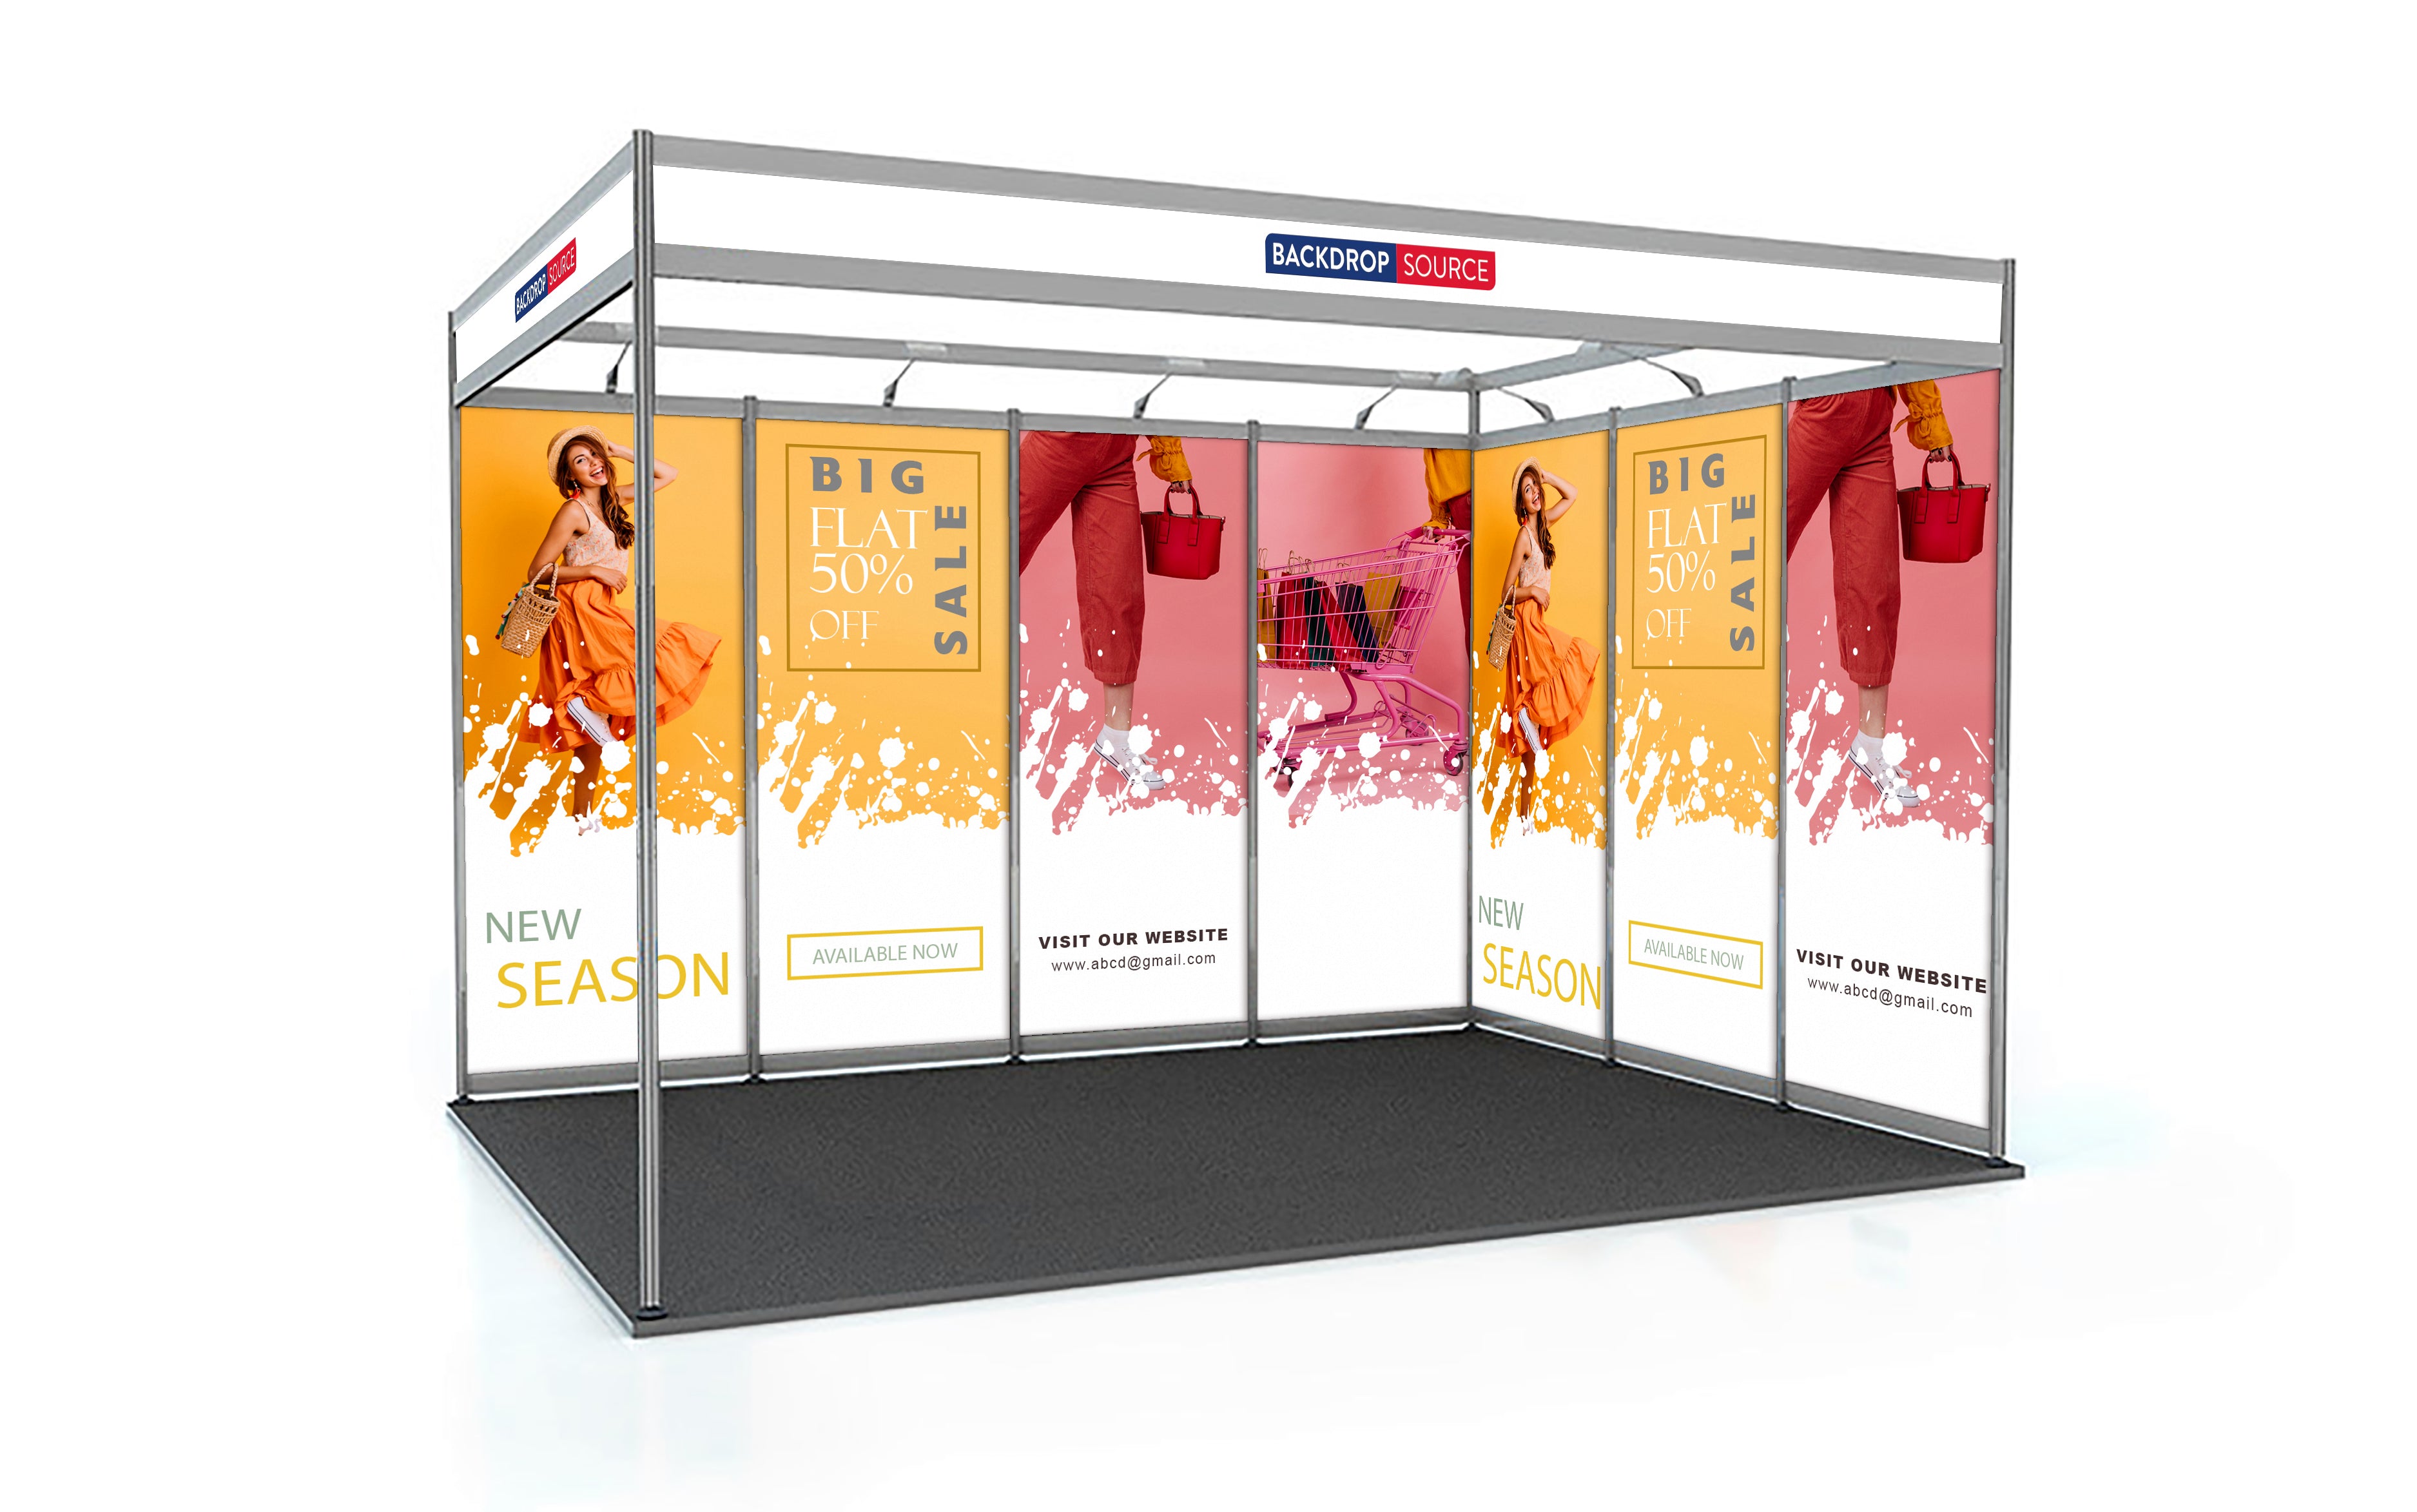 Shell Scheme Exhibition Graphics for 13.2ft Wide x 10ft Depth Booth